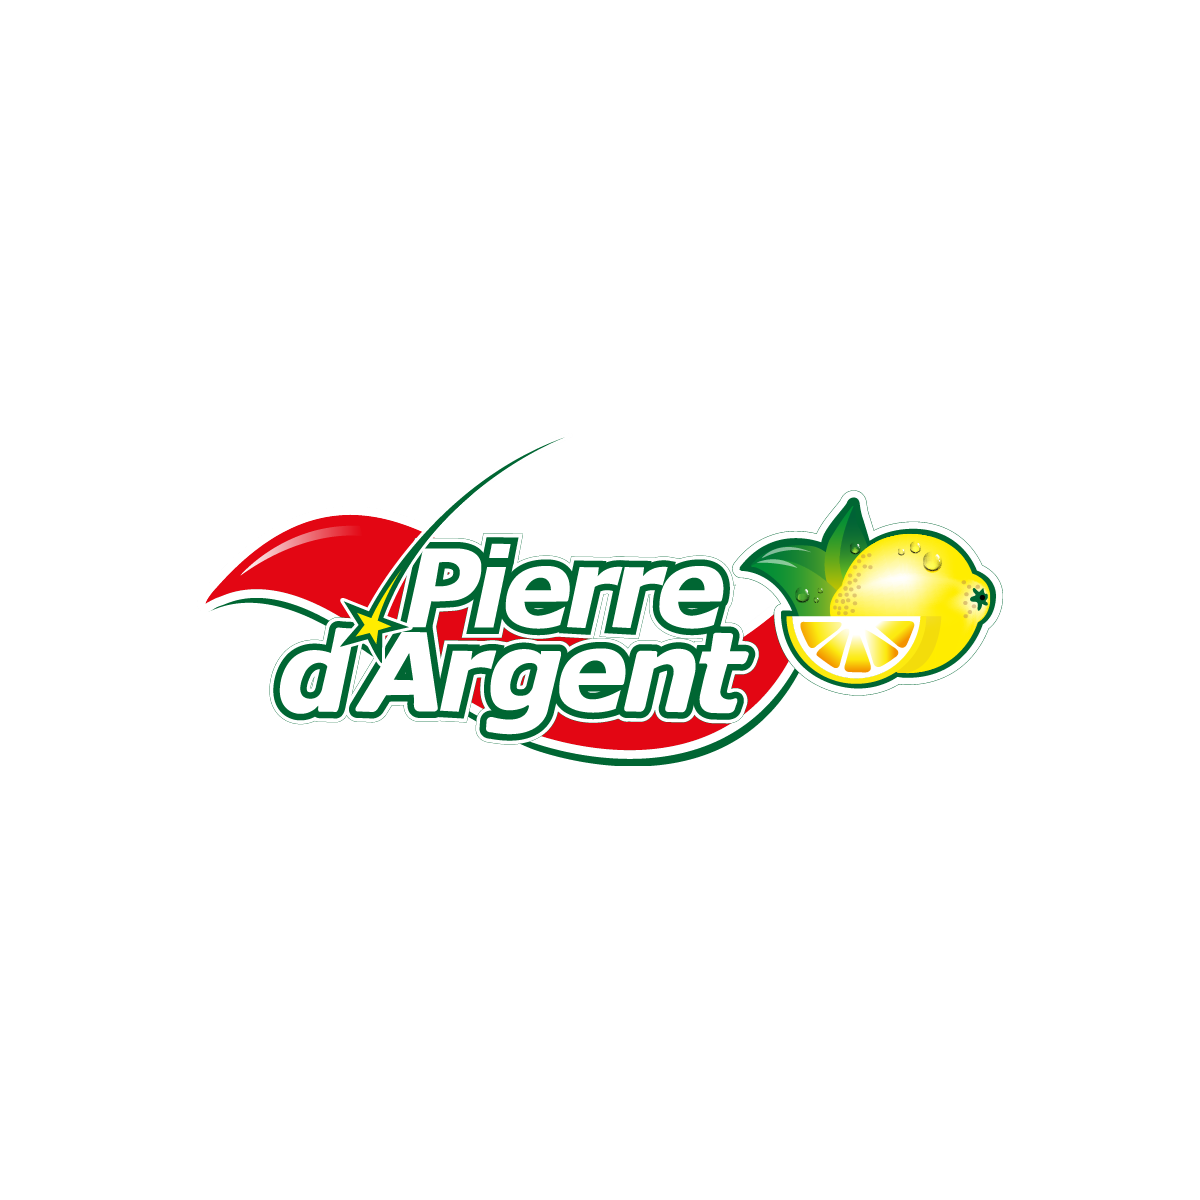 Where to Buy Pierre D'Argent Cleaners